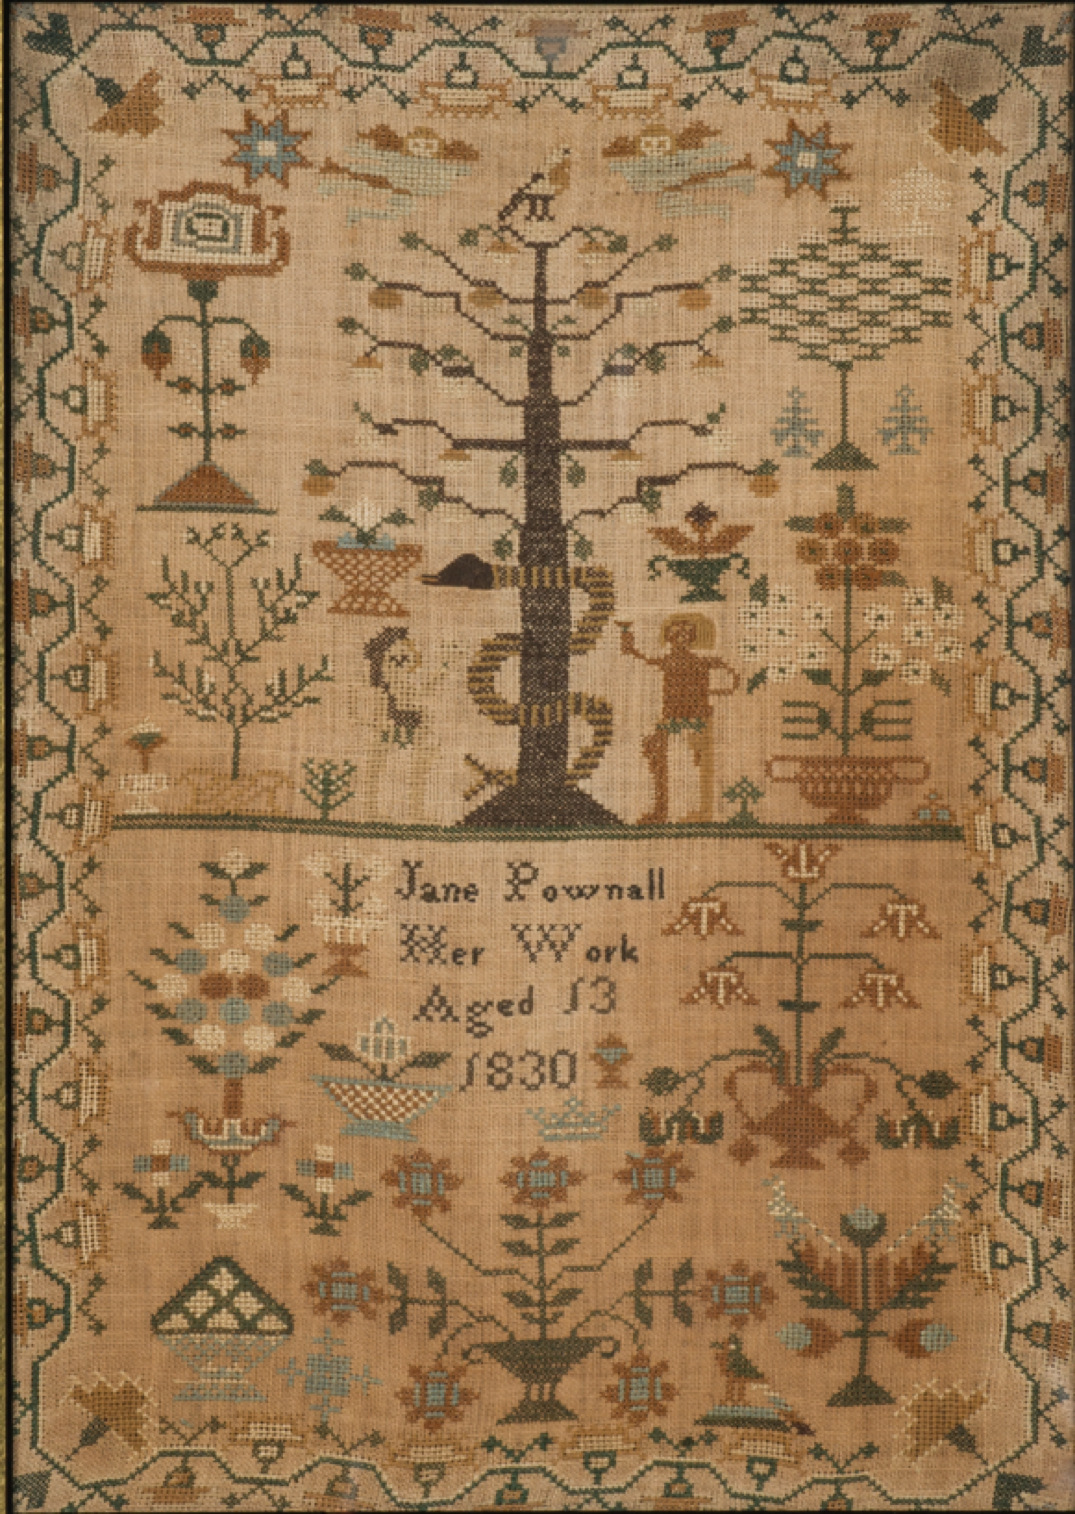 Embroidered sampler with figures of Adam and Eve standing on either side of a tall tree with a snake wrapped around it; under the tree are the words, “Jane Pownall, Her Work, Aged 13, 1830.”